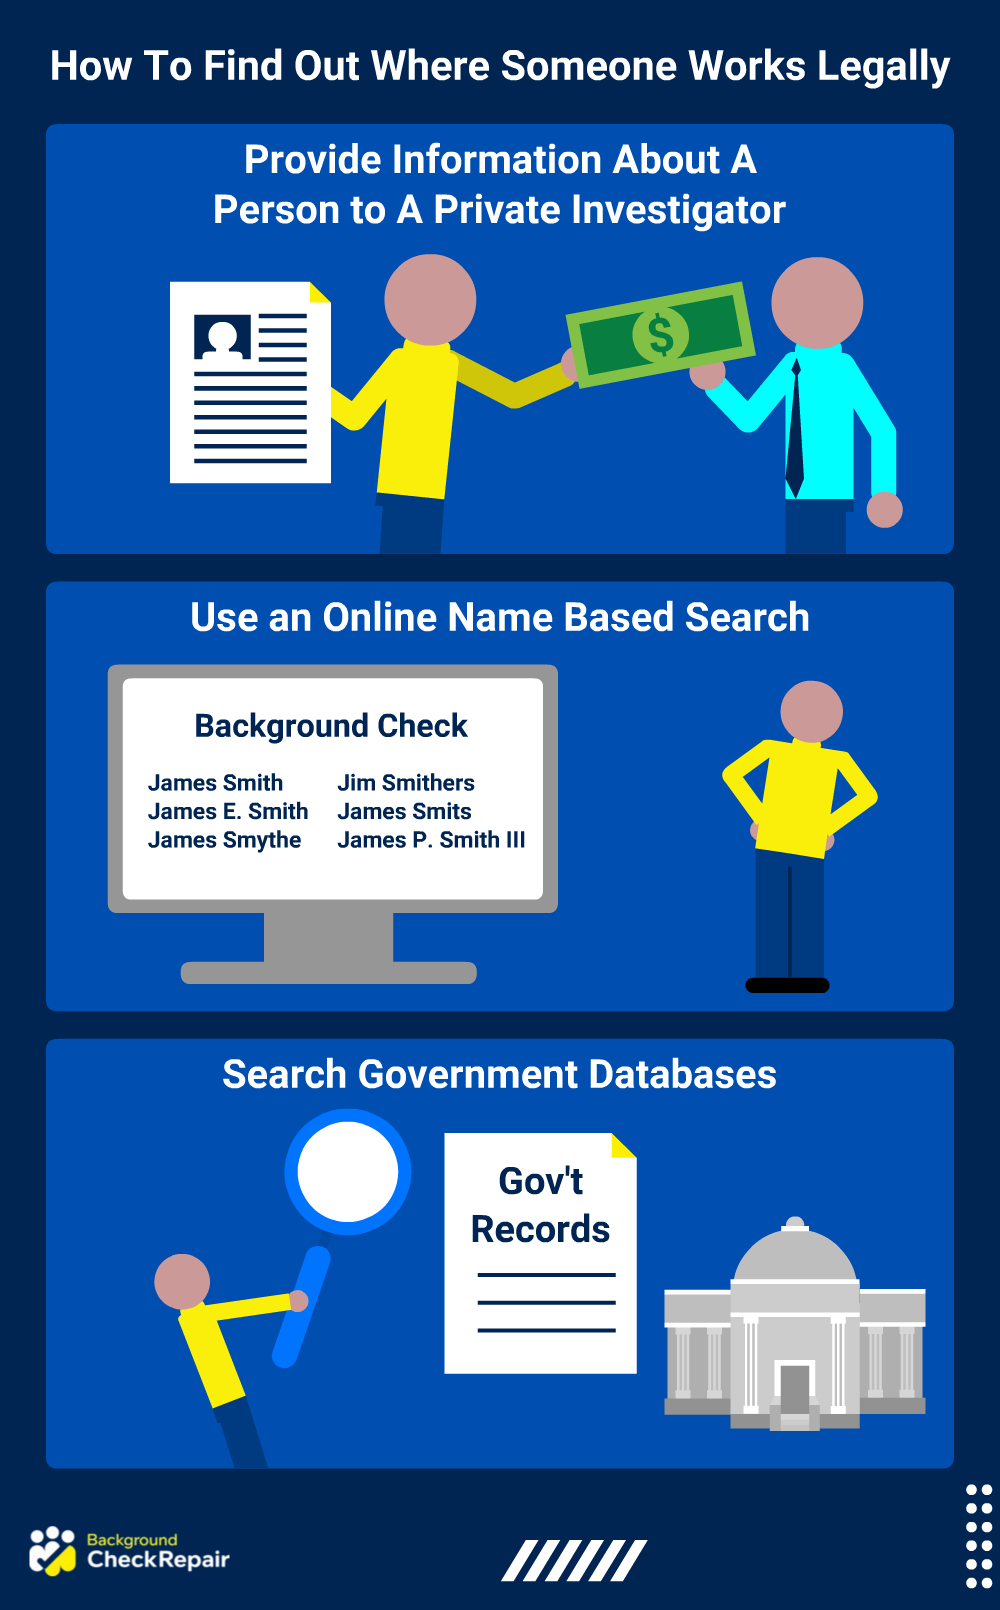 How to find out where someone works graphic offering steps that include find someone's work online, search government databases to find someone's place of work, and hire a private investigator to find out where someone works